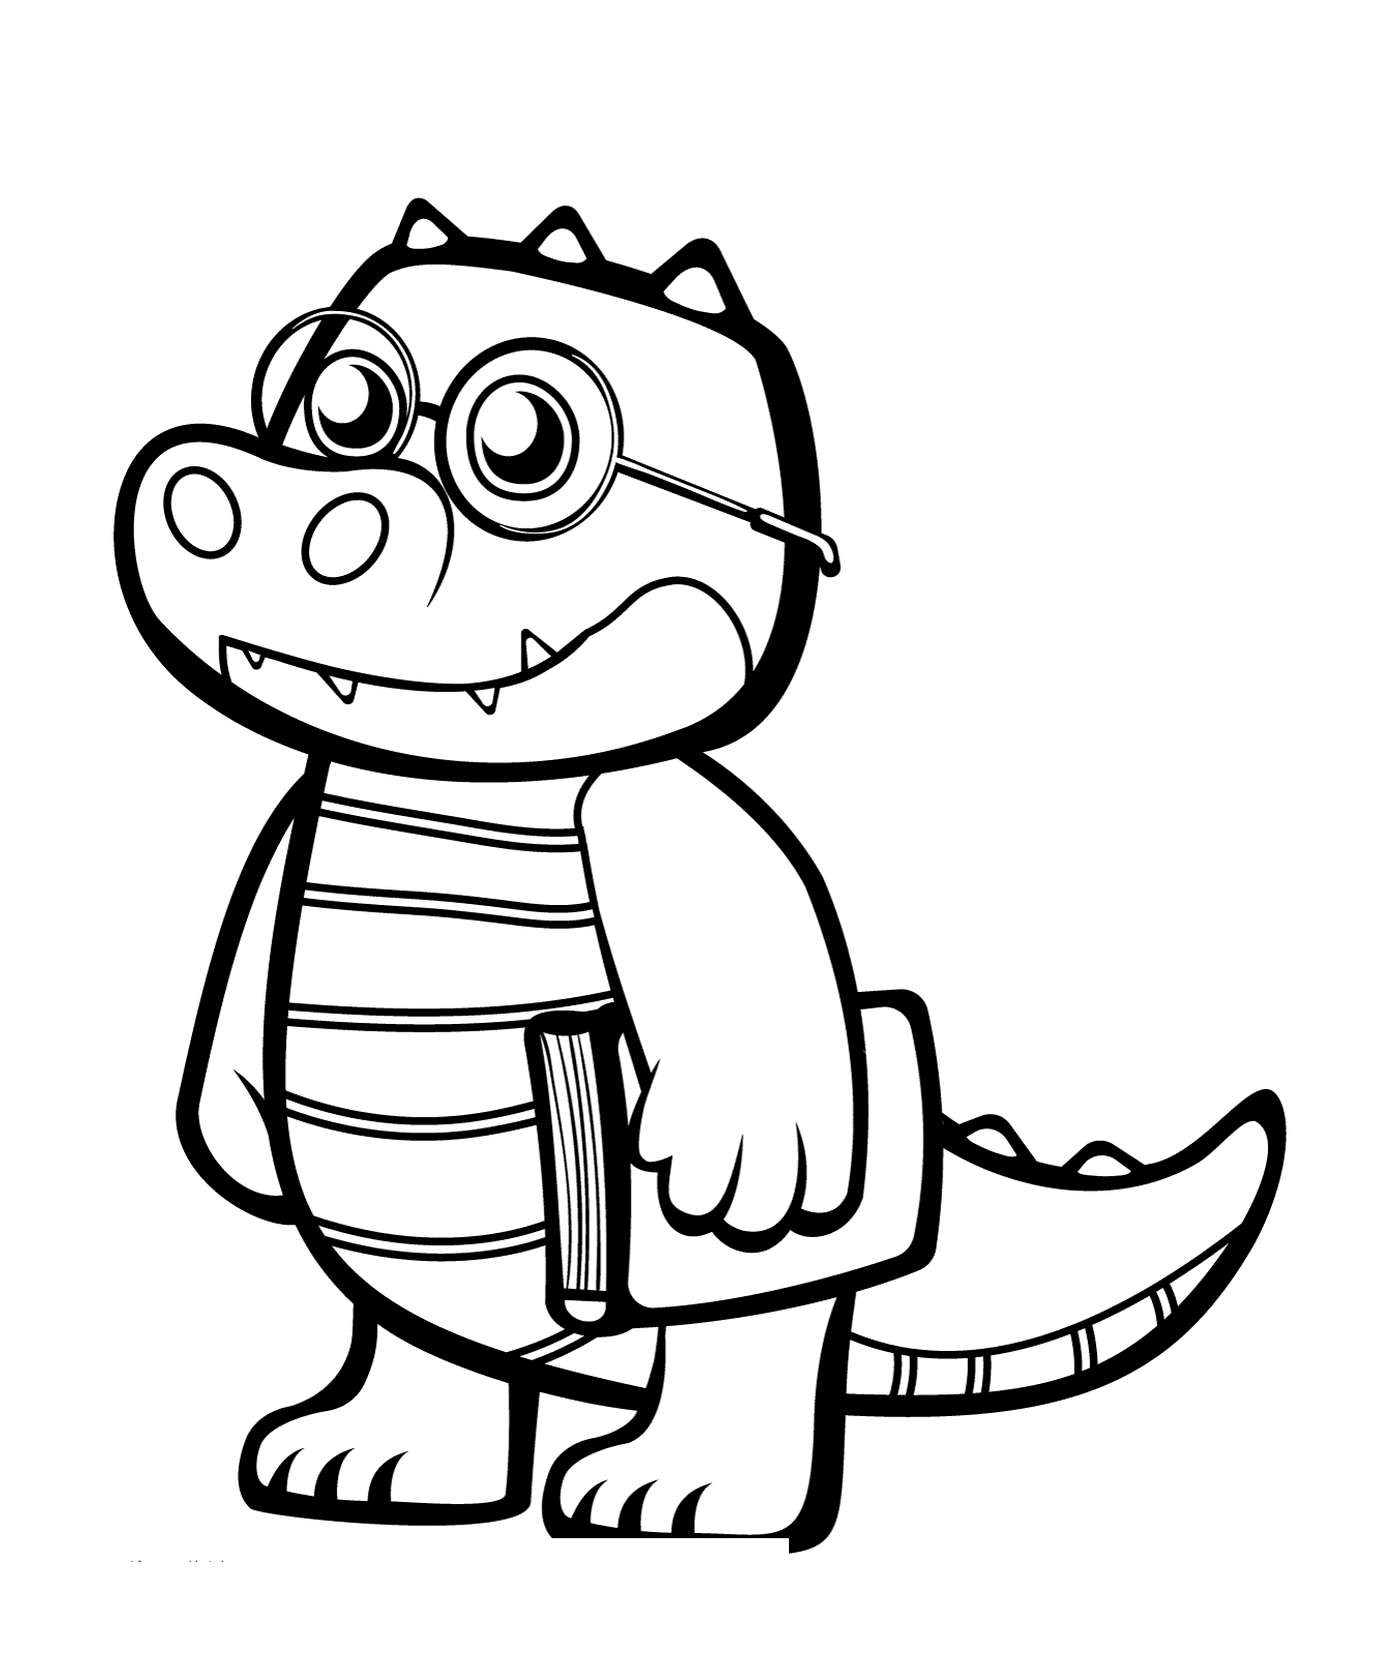  A crocodile with student glasses 